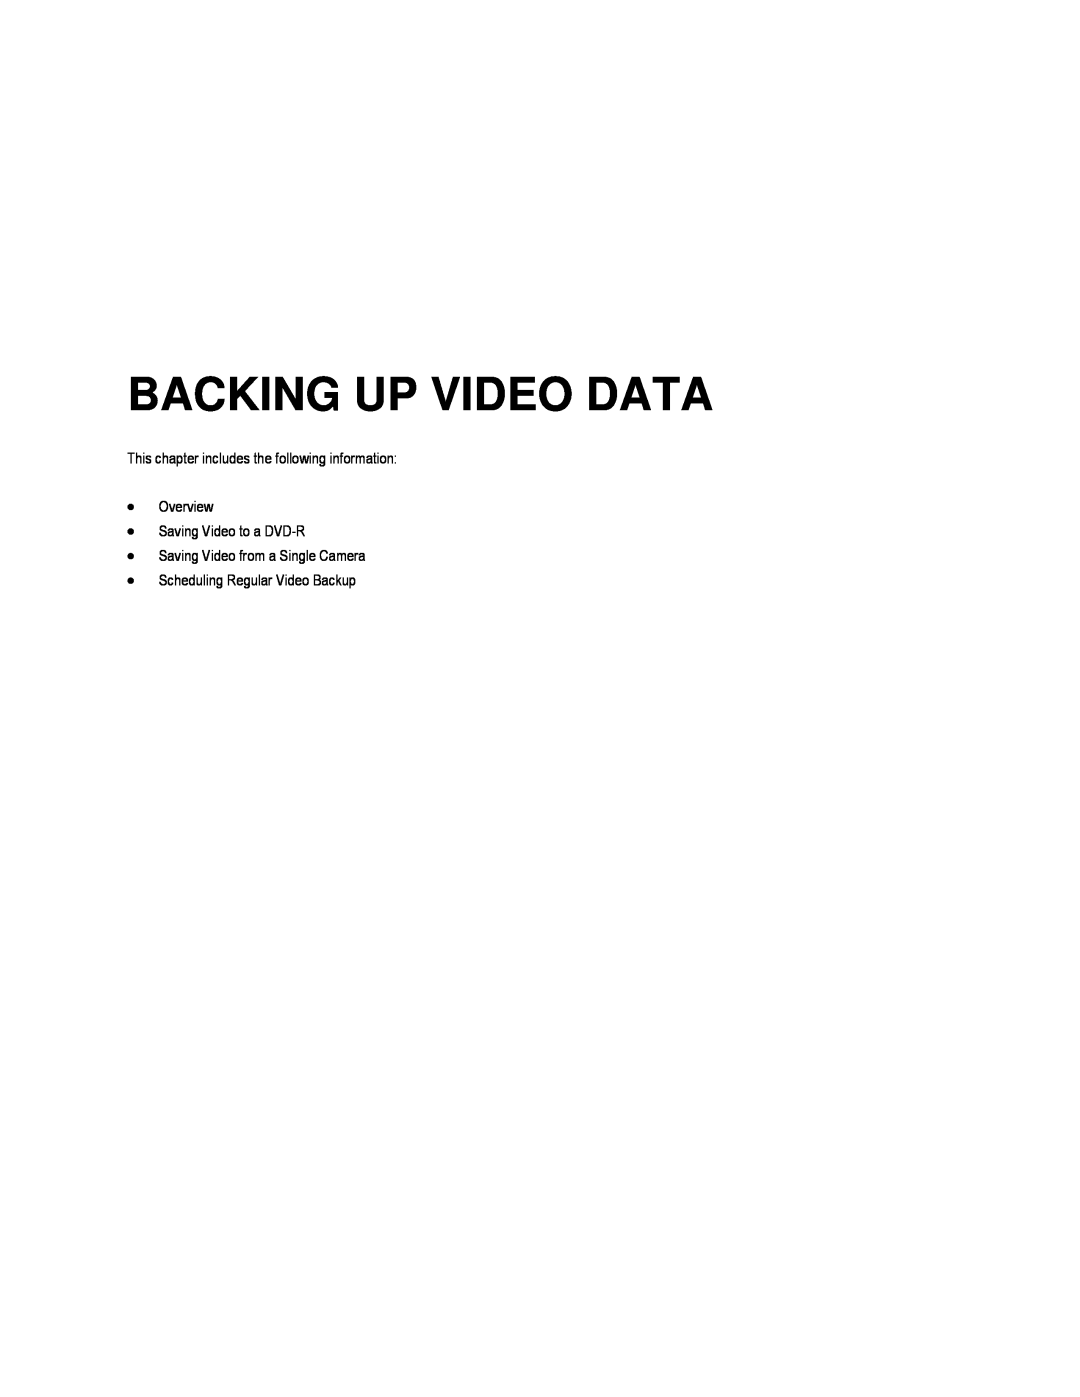 Toshiba HVR8-X, EVR8-X, EVR32-X, HVR32-X Backing Up Video Data, This chapter includes the following information Overview 